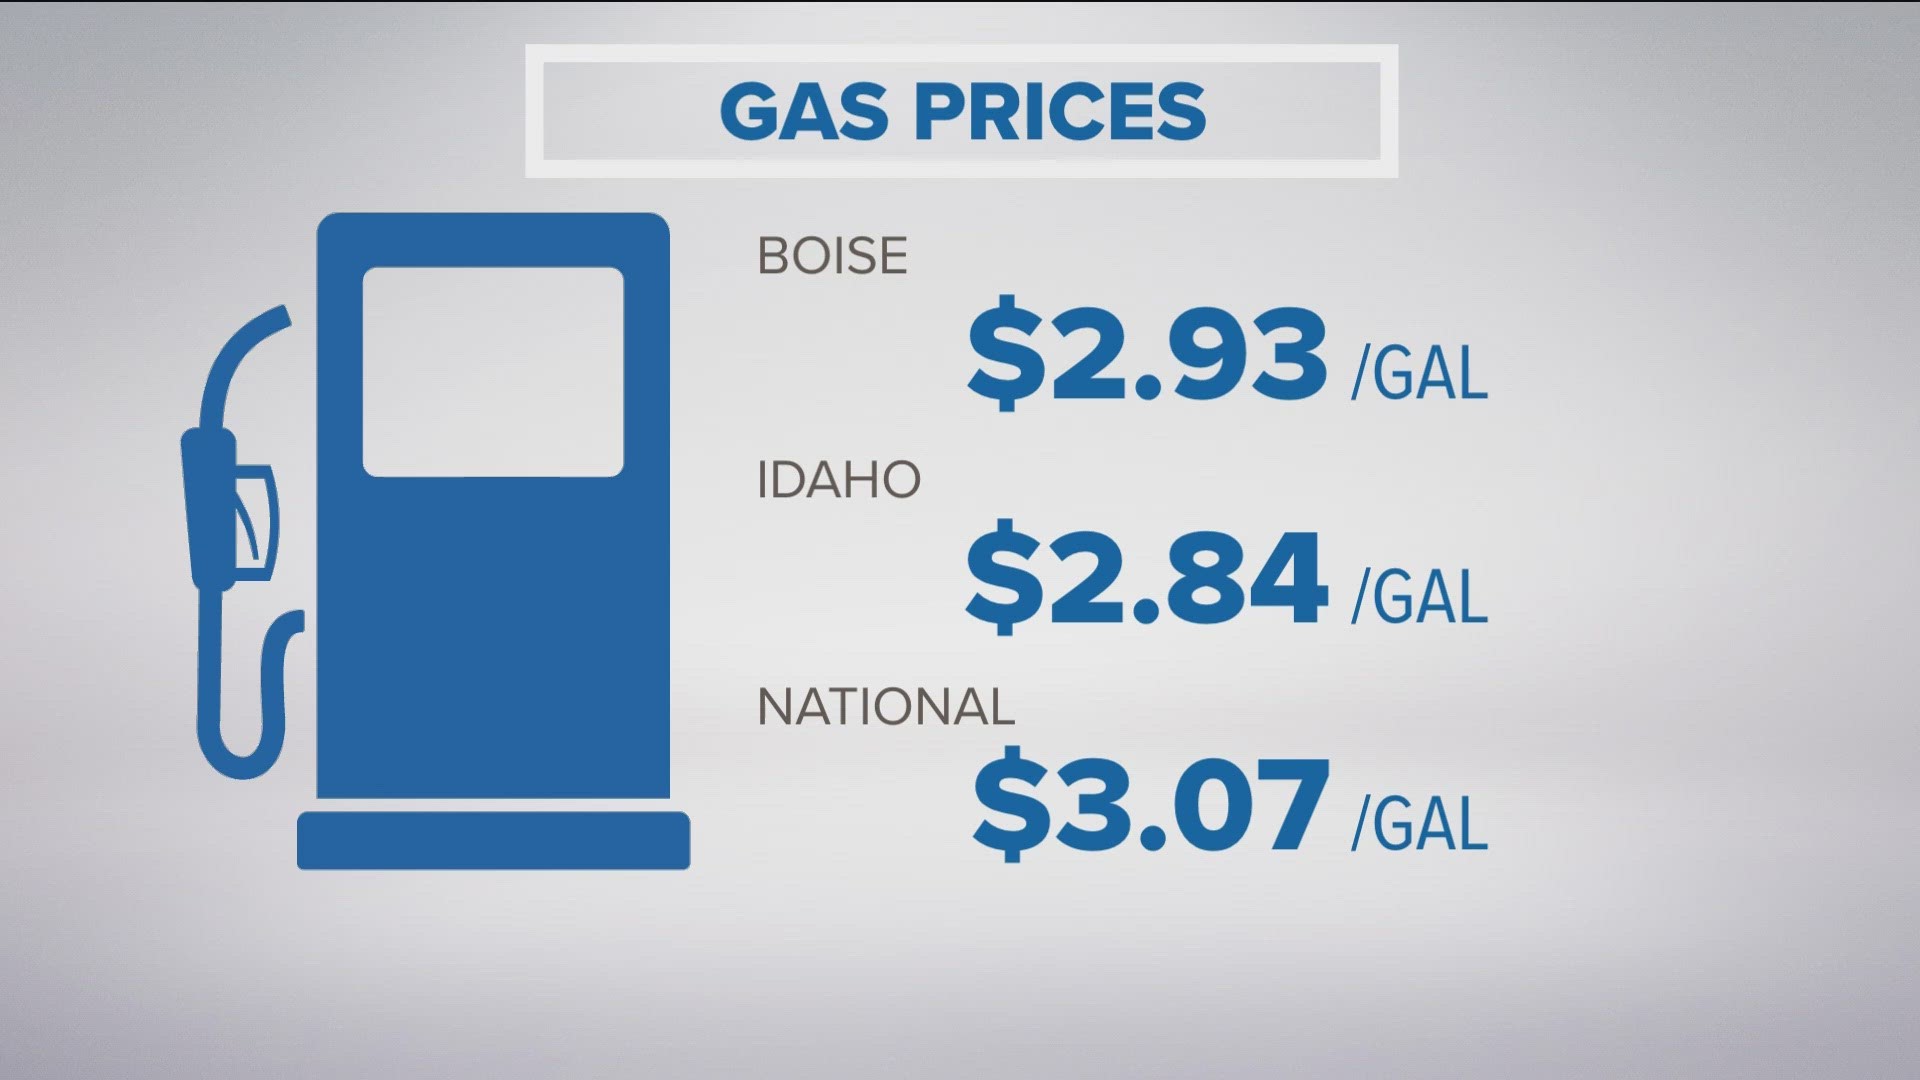 With a 4.9-cent drop in gas prices, Boise now sits below the national average for a gallon of gas.